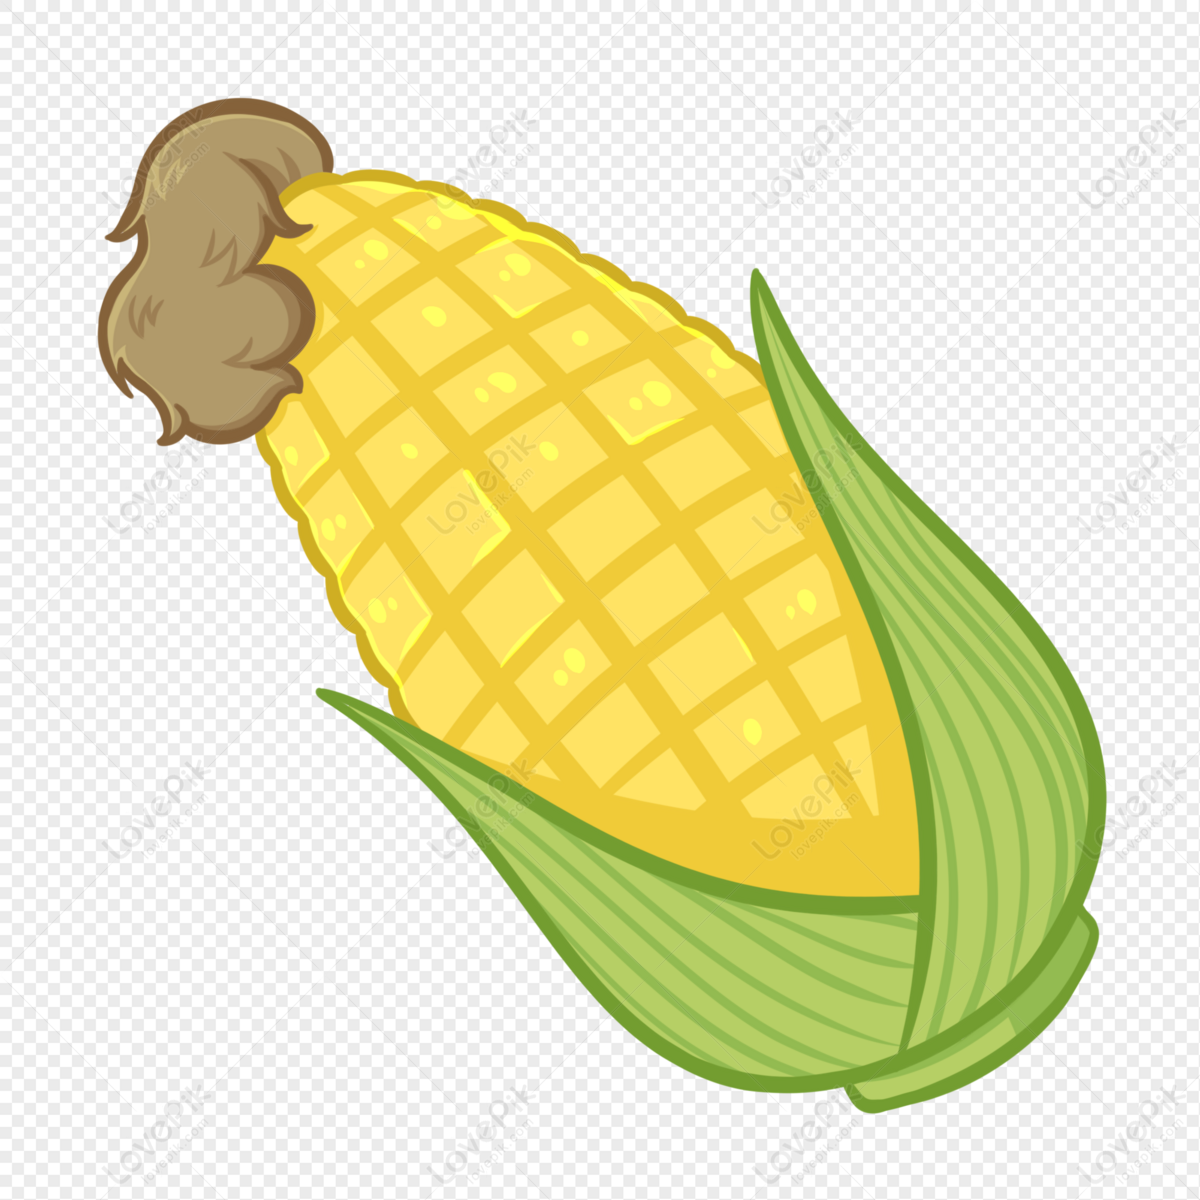 Corn PNG Transparent Background And Clipart Image For Free Download -  Lovepik | 401249430